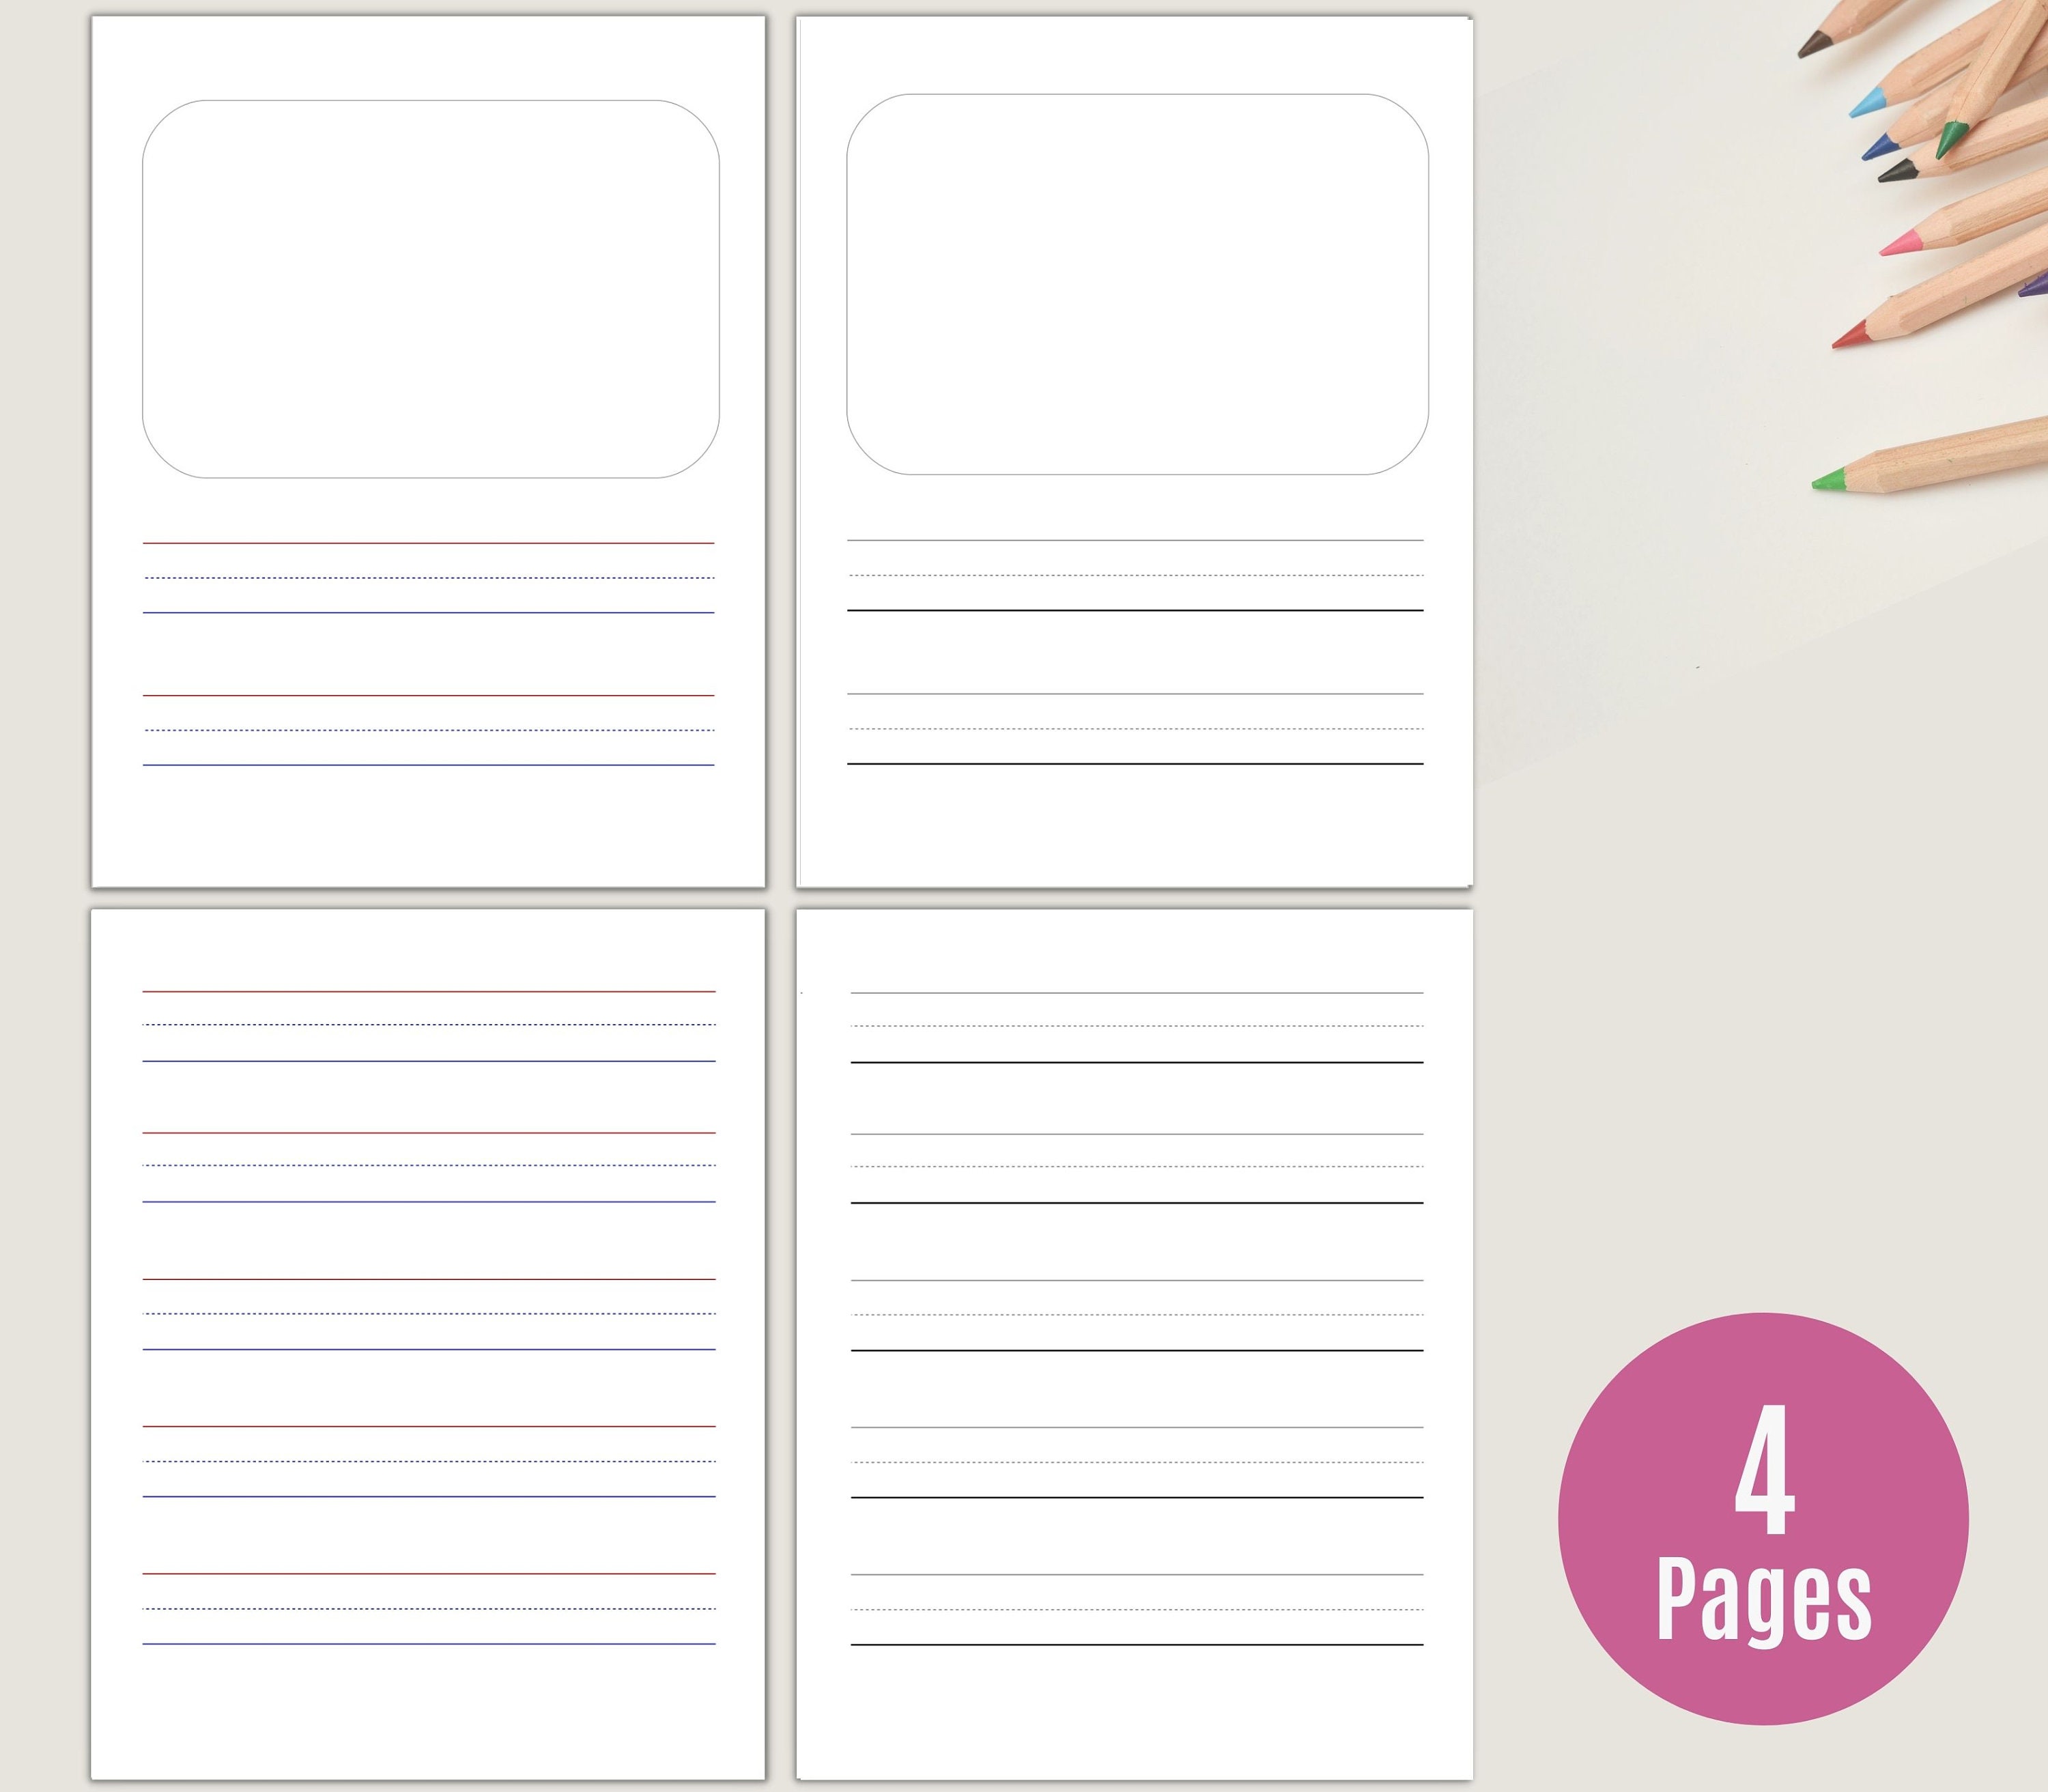 Free Printable Blank and White Kindergarten Writing Paper Template · InkPx